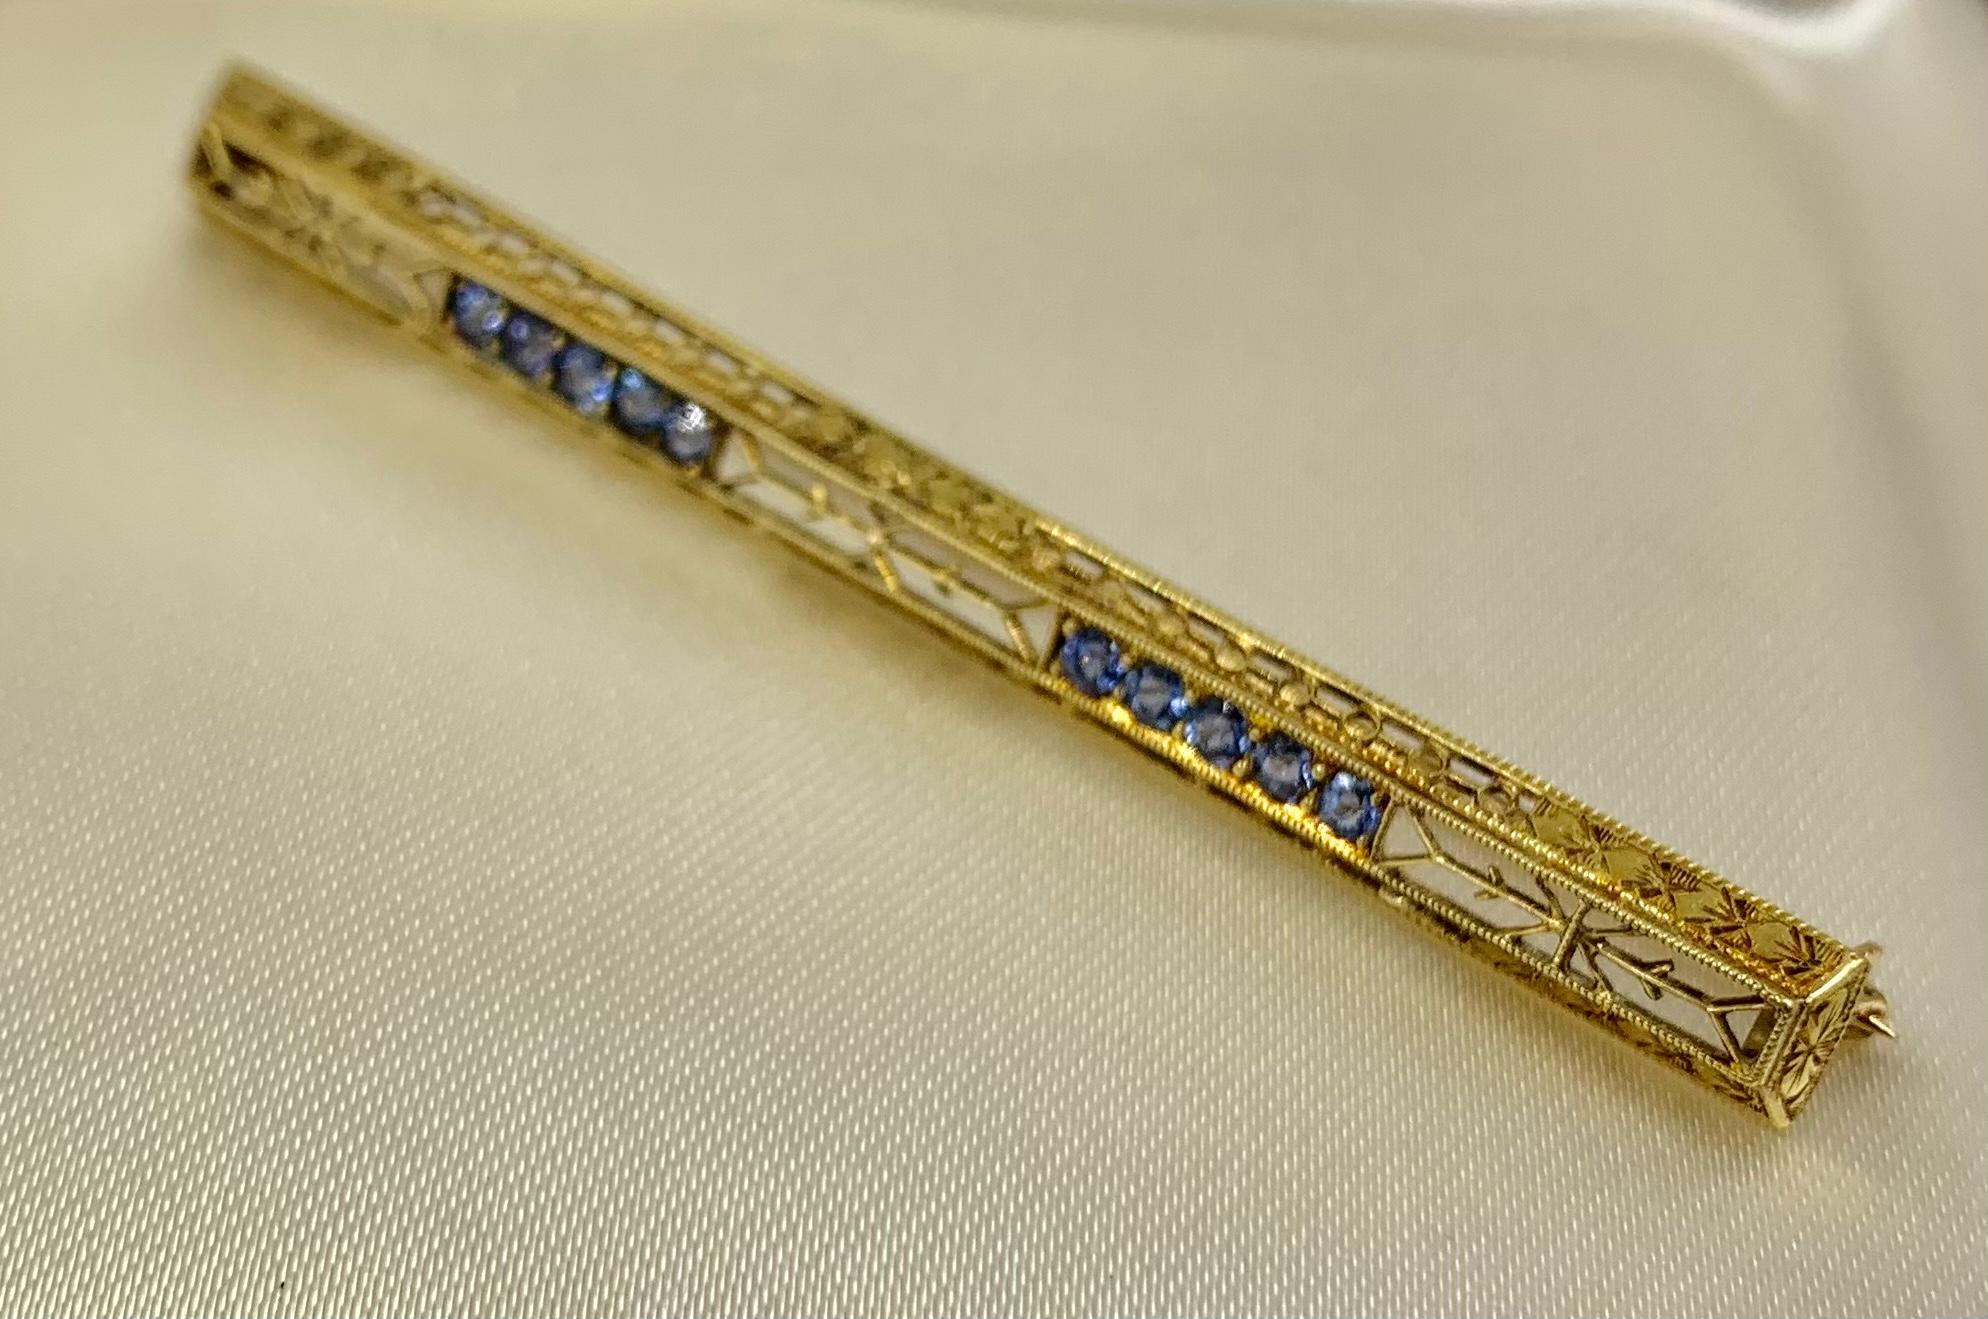 Beautifully intricate 14k yellow gold filligre bar brooch set with 10 medium blue sapphires approximately .3 TCW. The sapphires set in two lines of five gemstones flanked by elongated filigree sections with stylized arrow motifs, framed by a highly